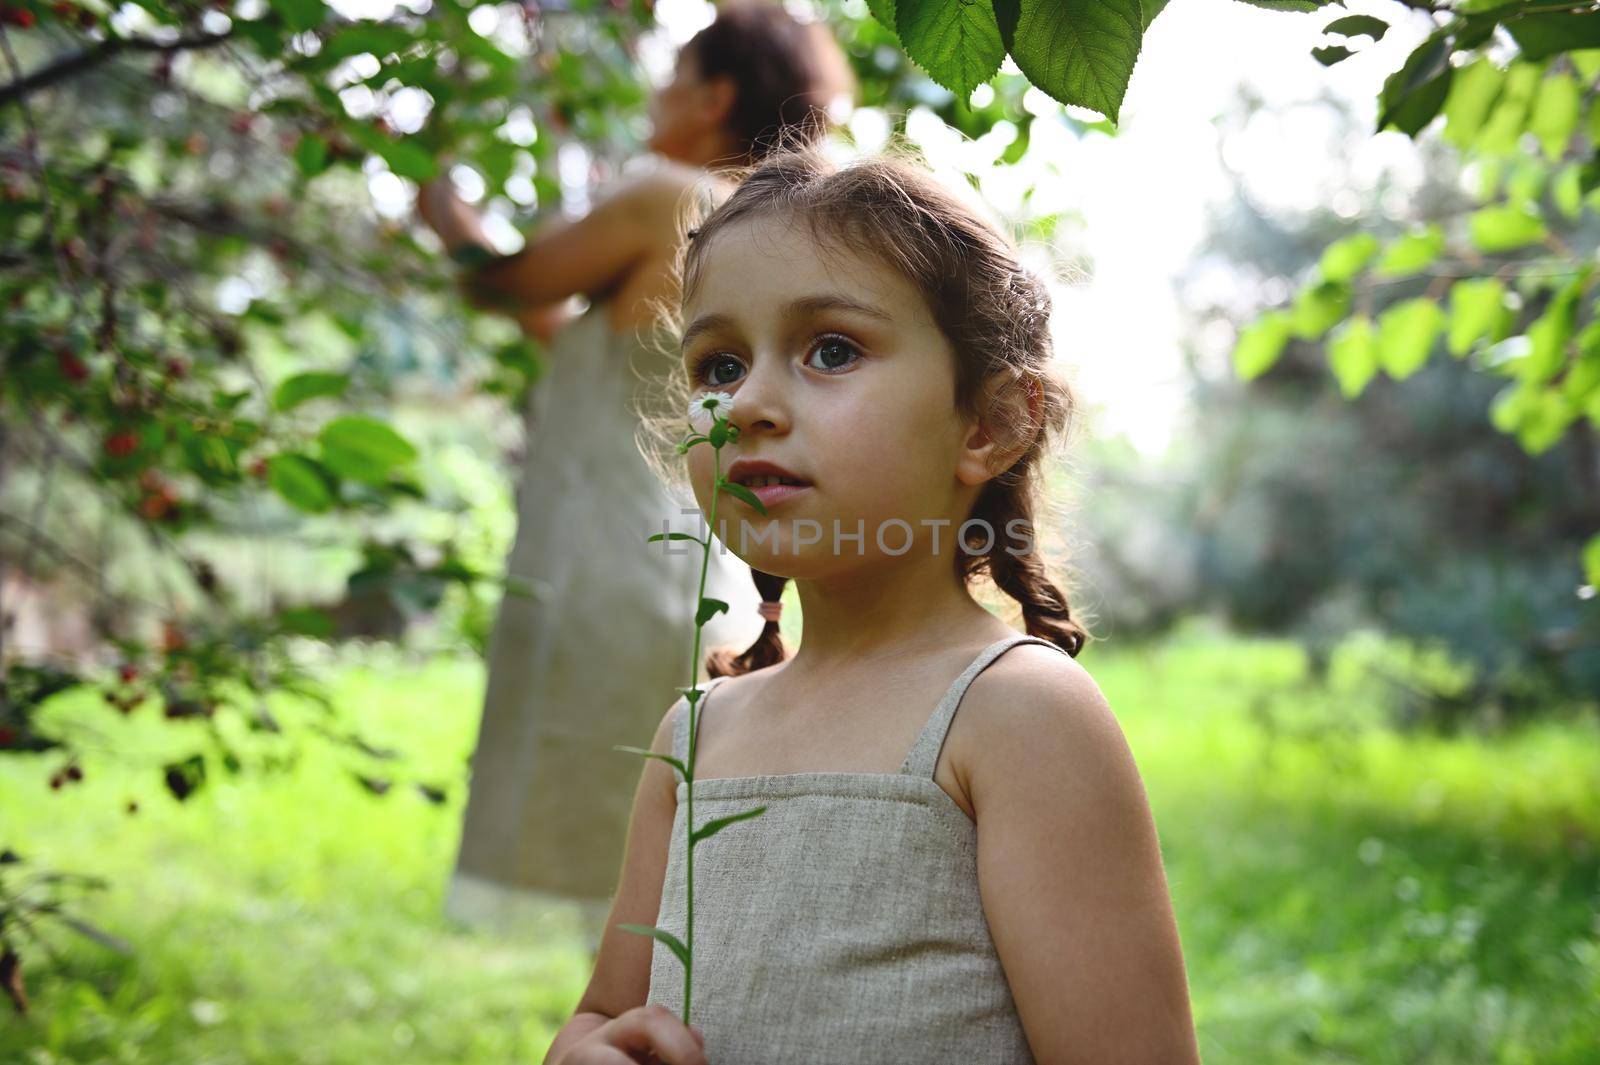 Beautiful little girl enjoying the scent of a wildflower against the background of her mother picking cherries in the orchard